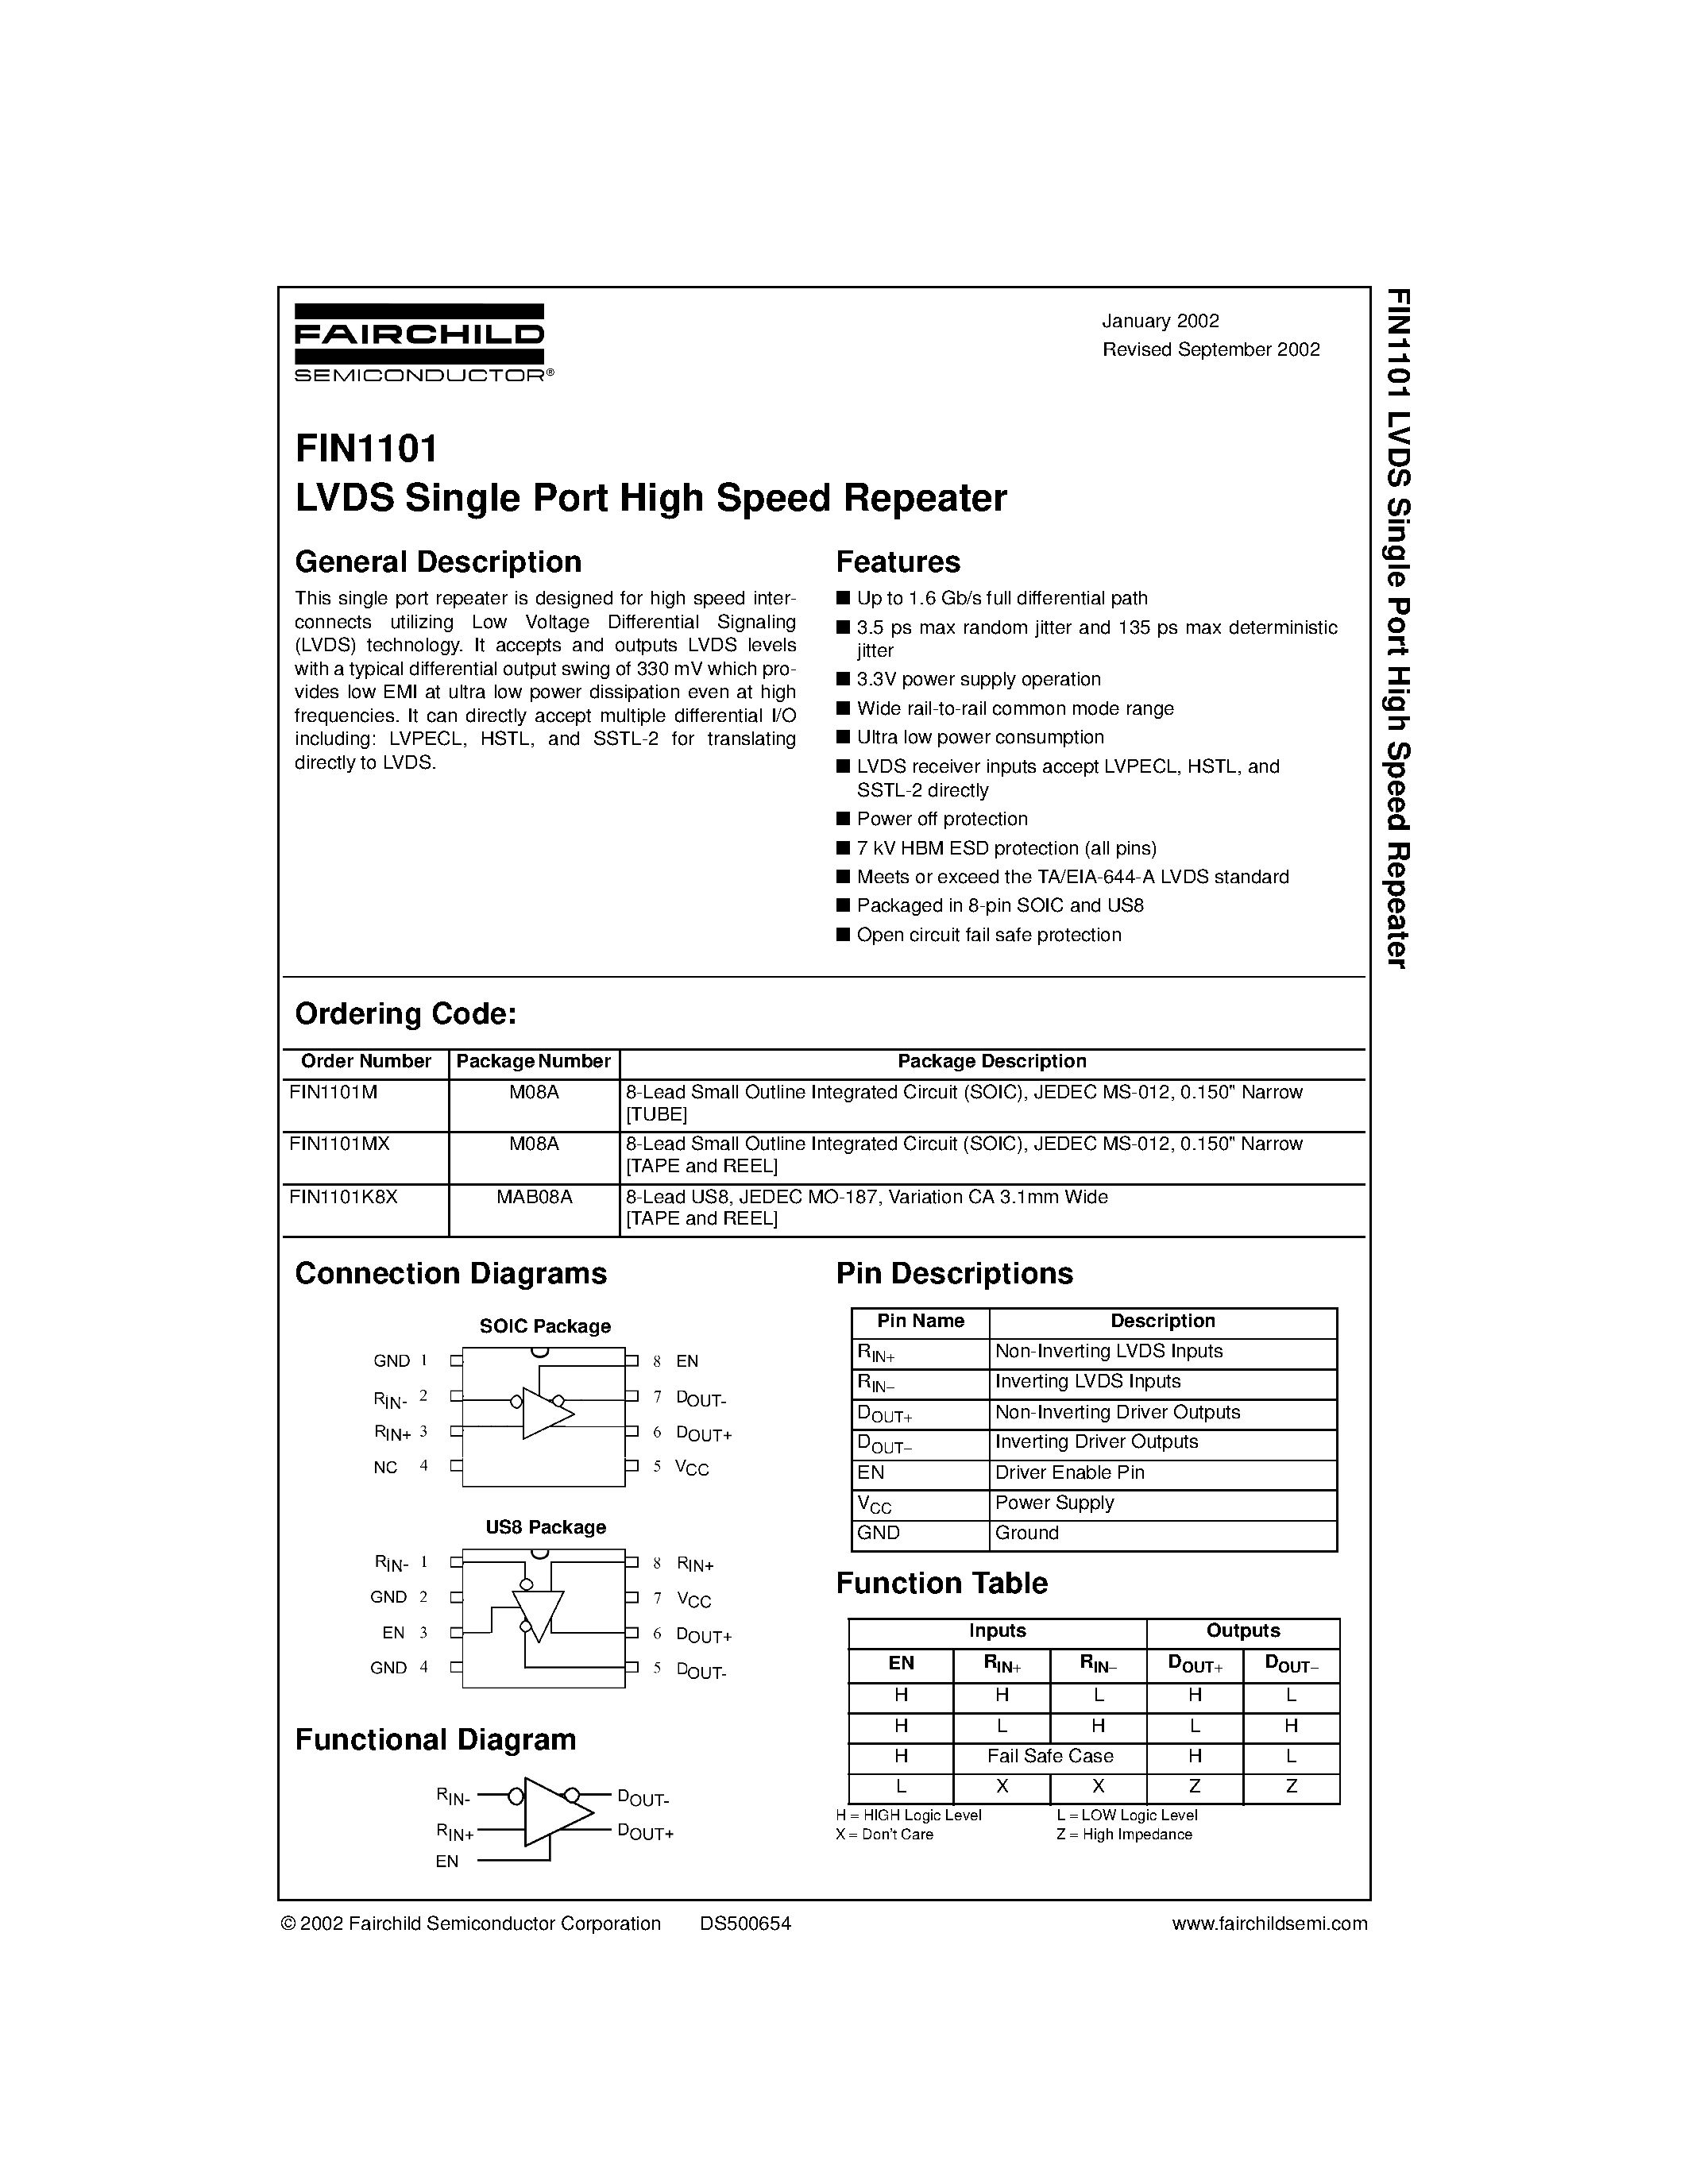 Datasheet FIN1101K8X - LVDS Single Port High Speed Repeater page 1